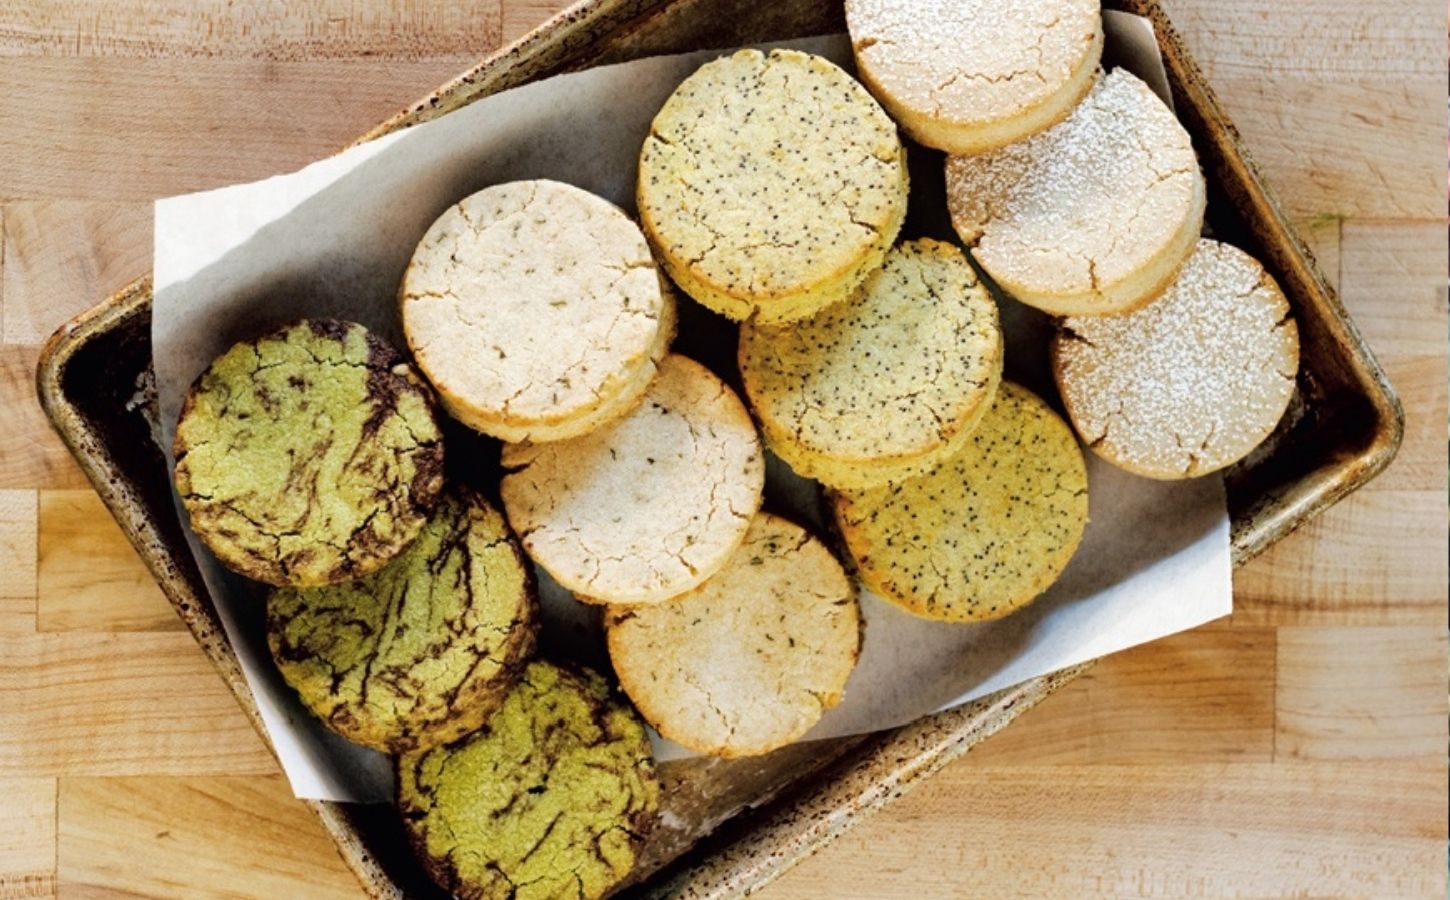 Scottish shortbread made to a vegan and dairy-free recipe